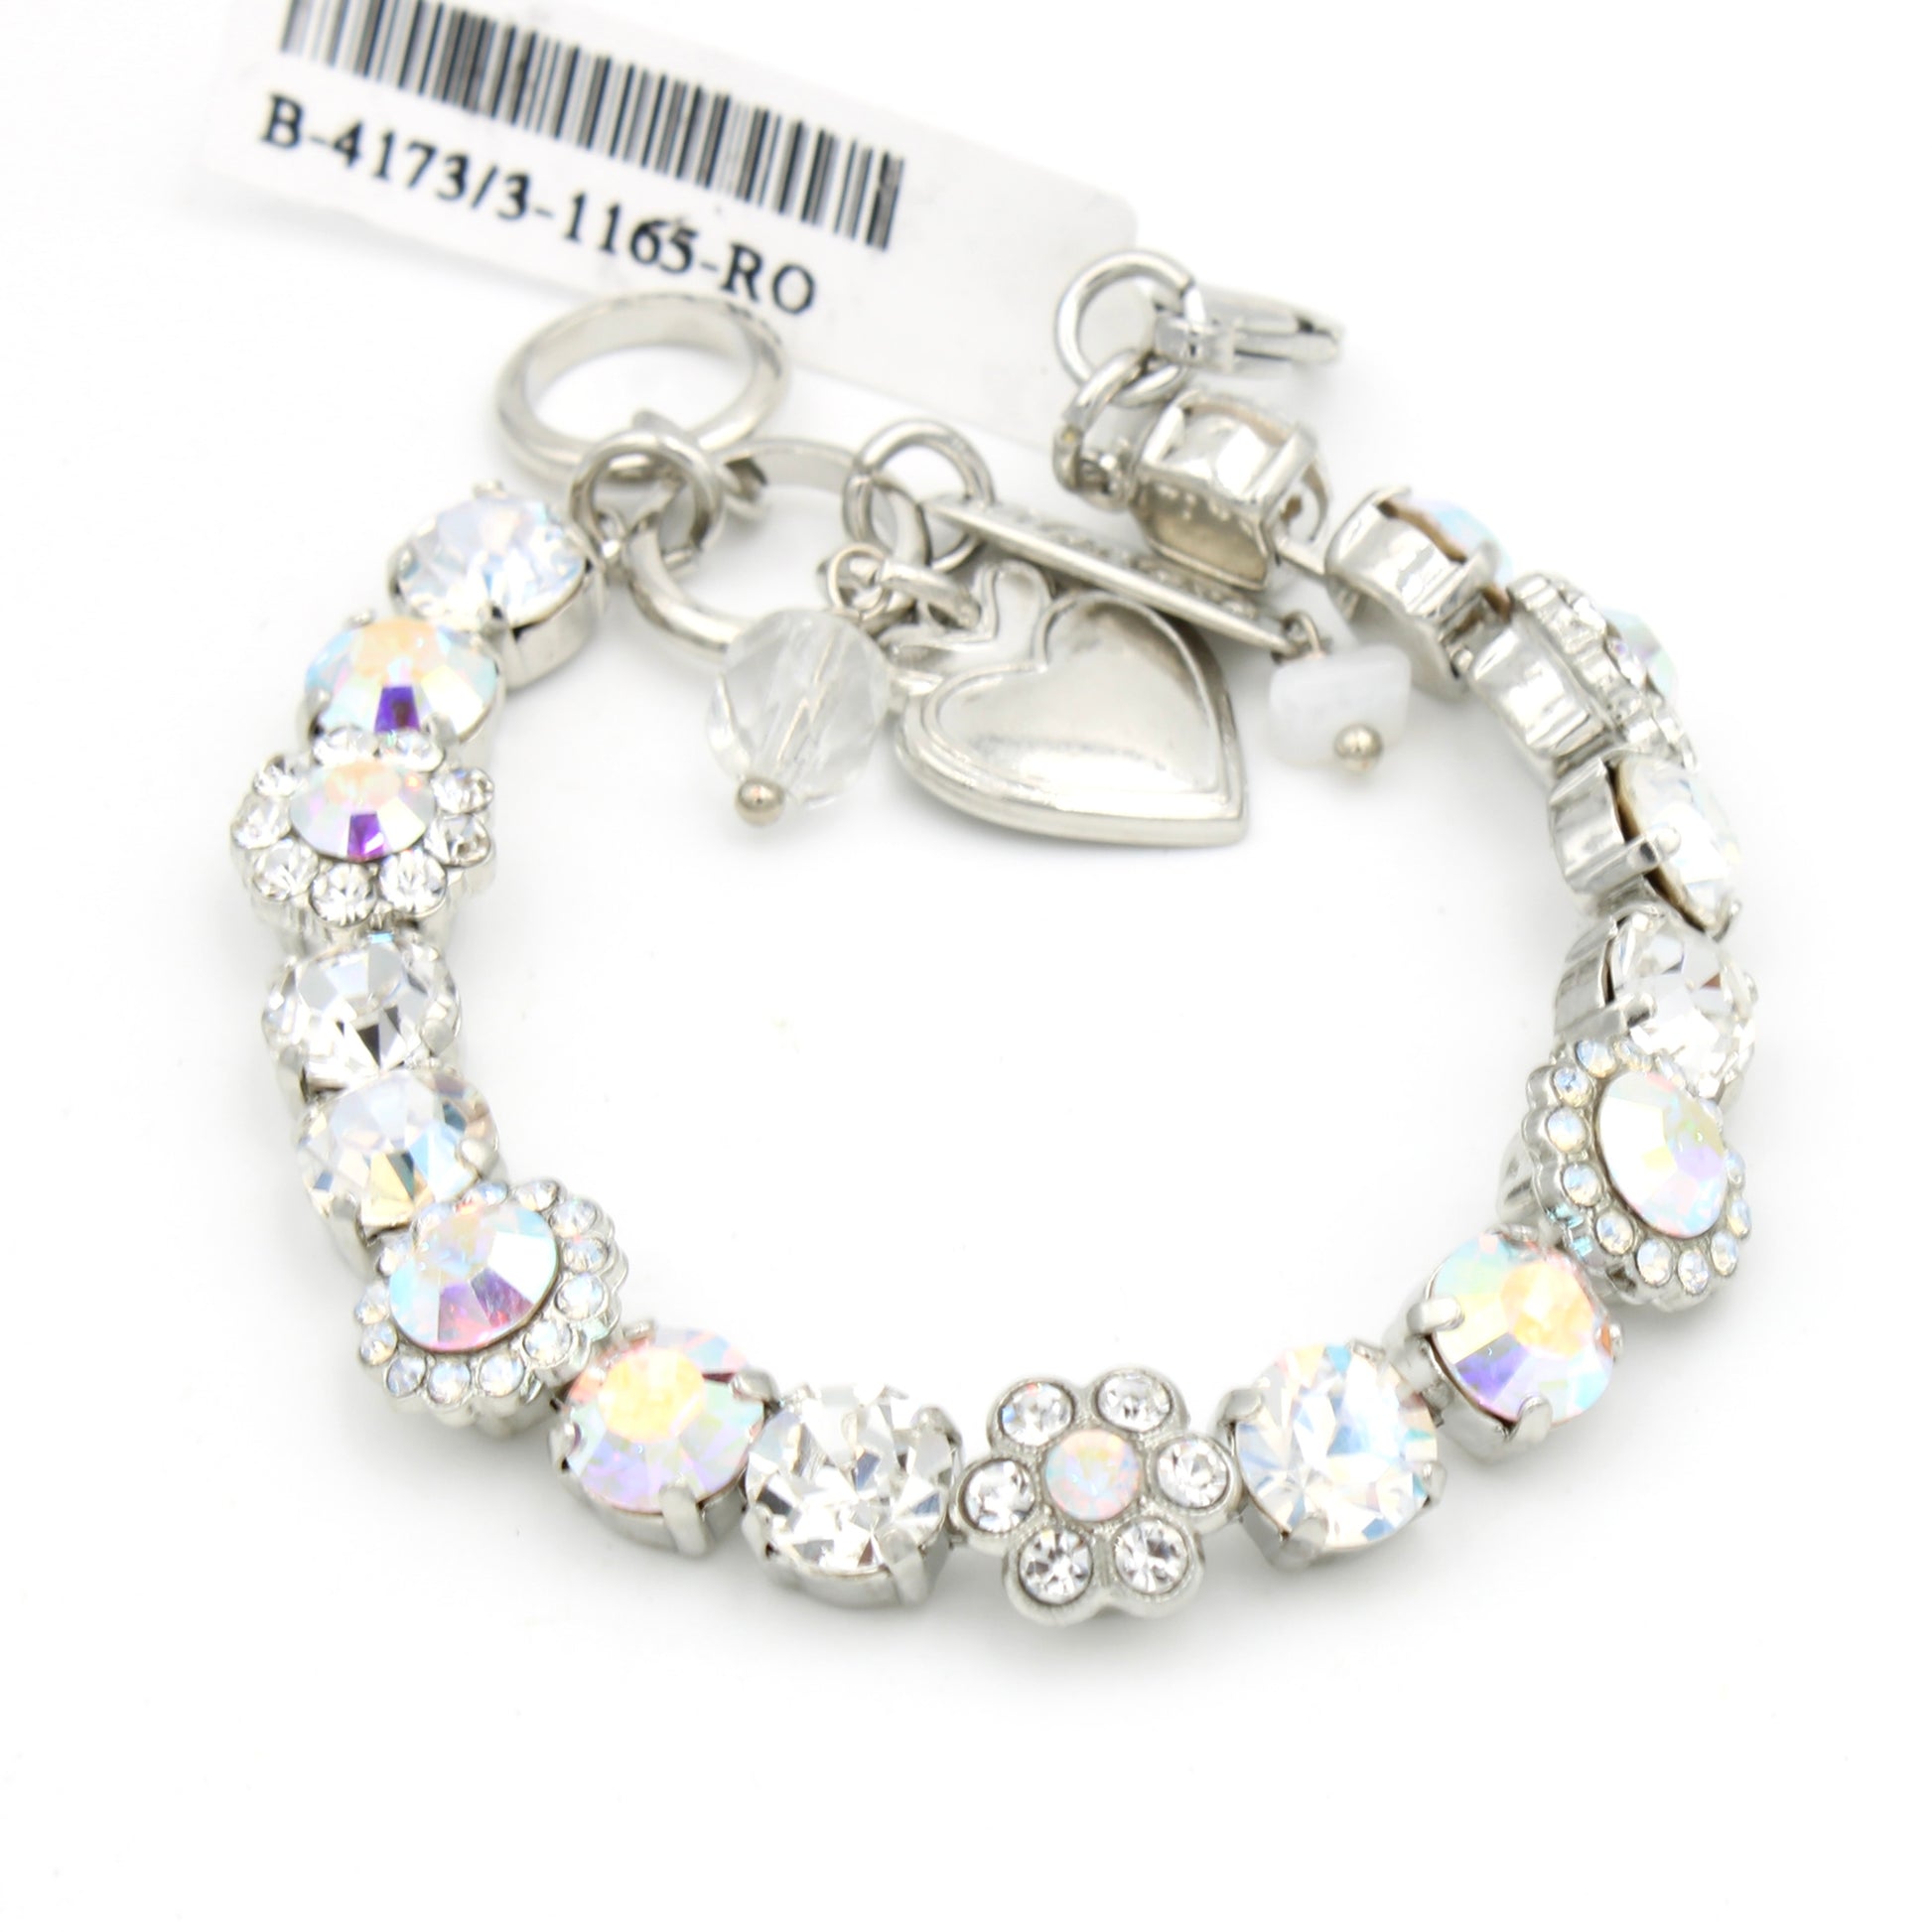 Winds of Change Collection Medium Must-Have Blossom Bracelet - MaryTyke's